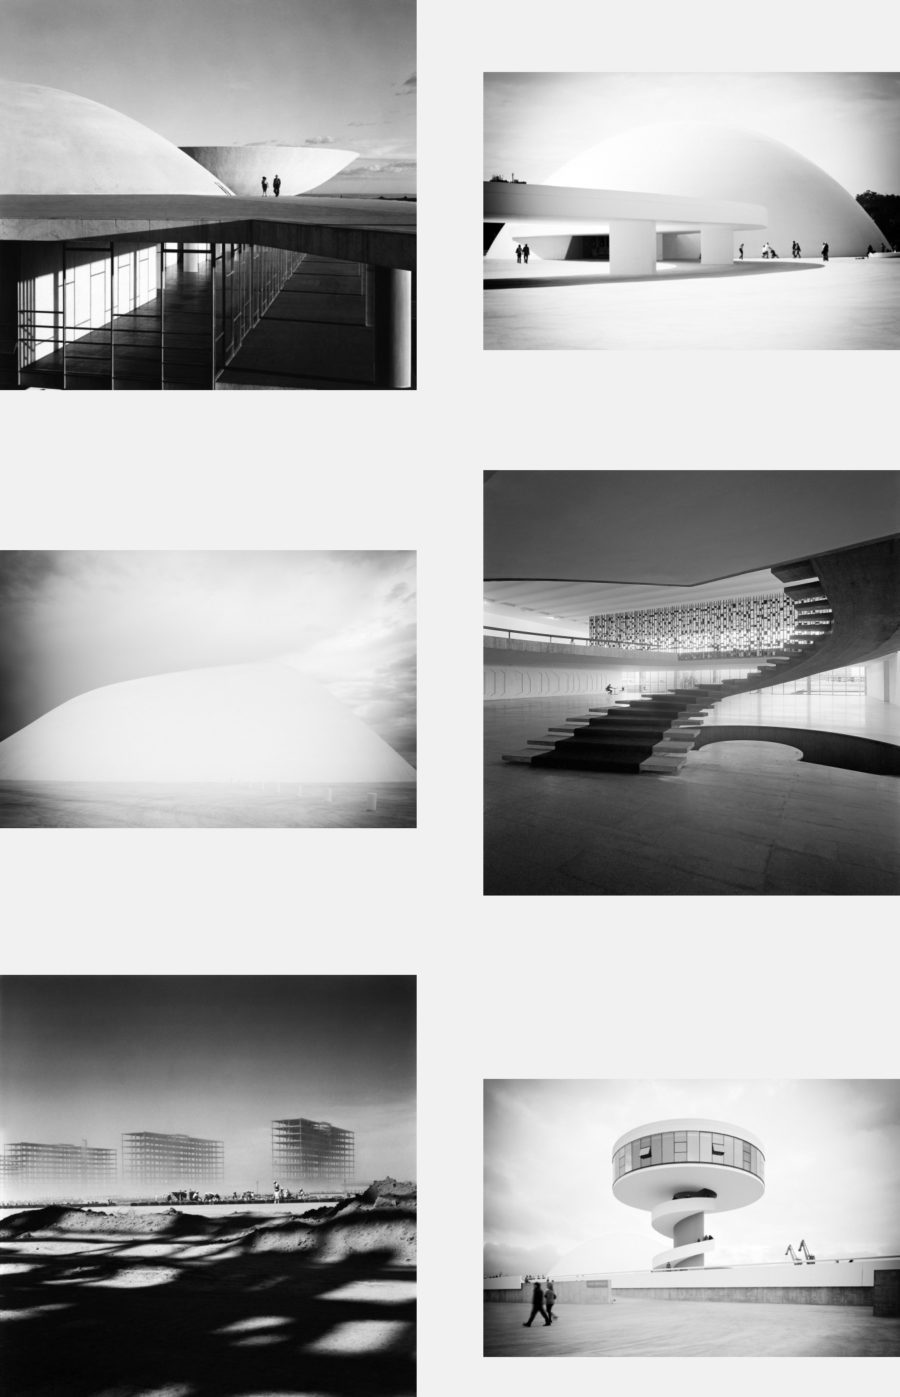 In honor of the late Oscar Niemeyer / Daniel Marshall Architects